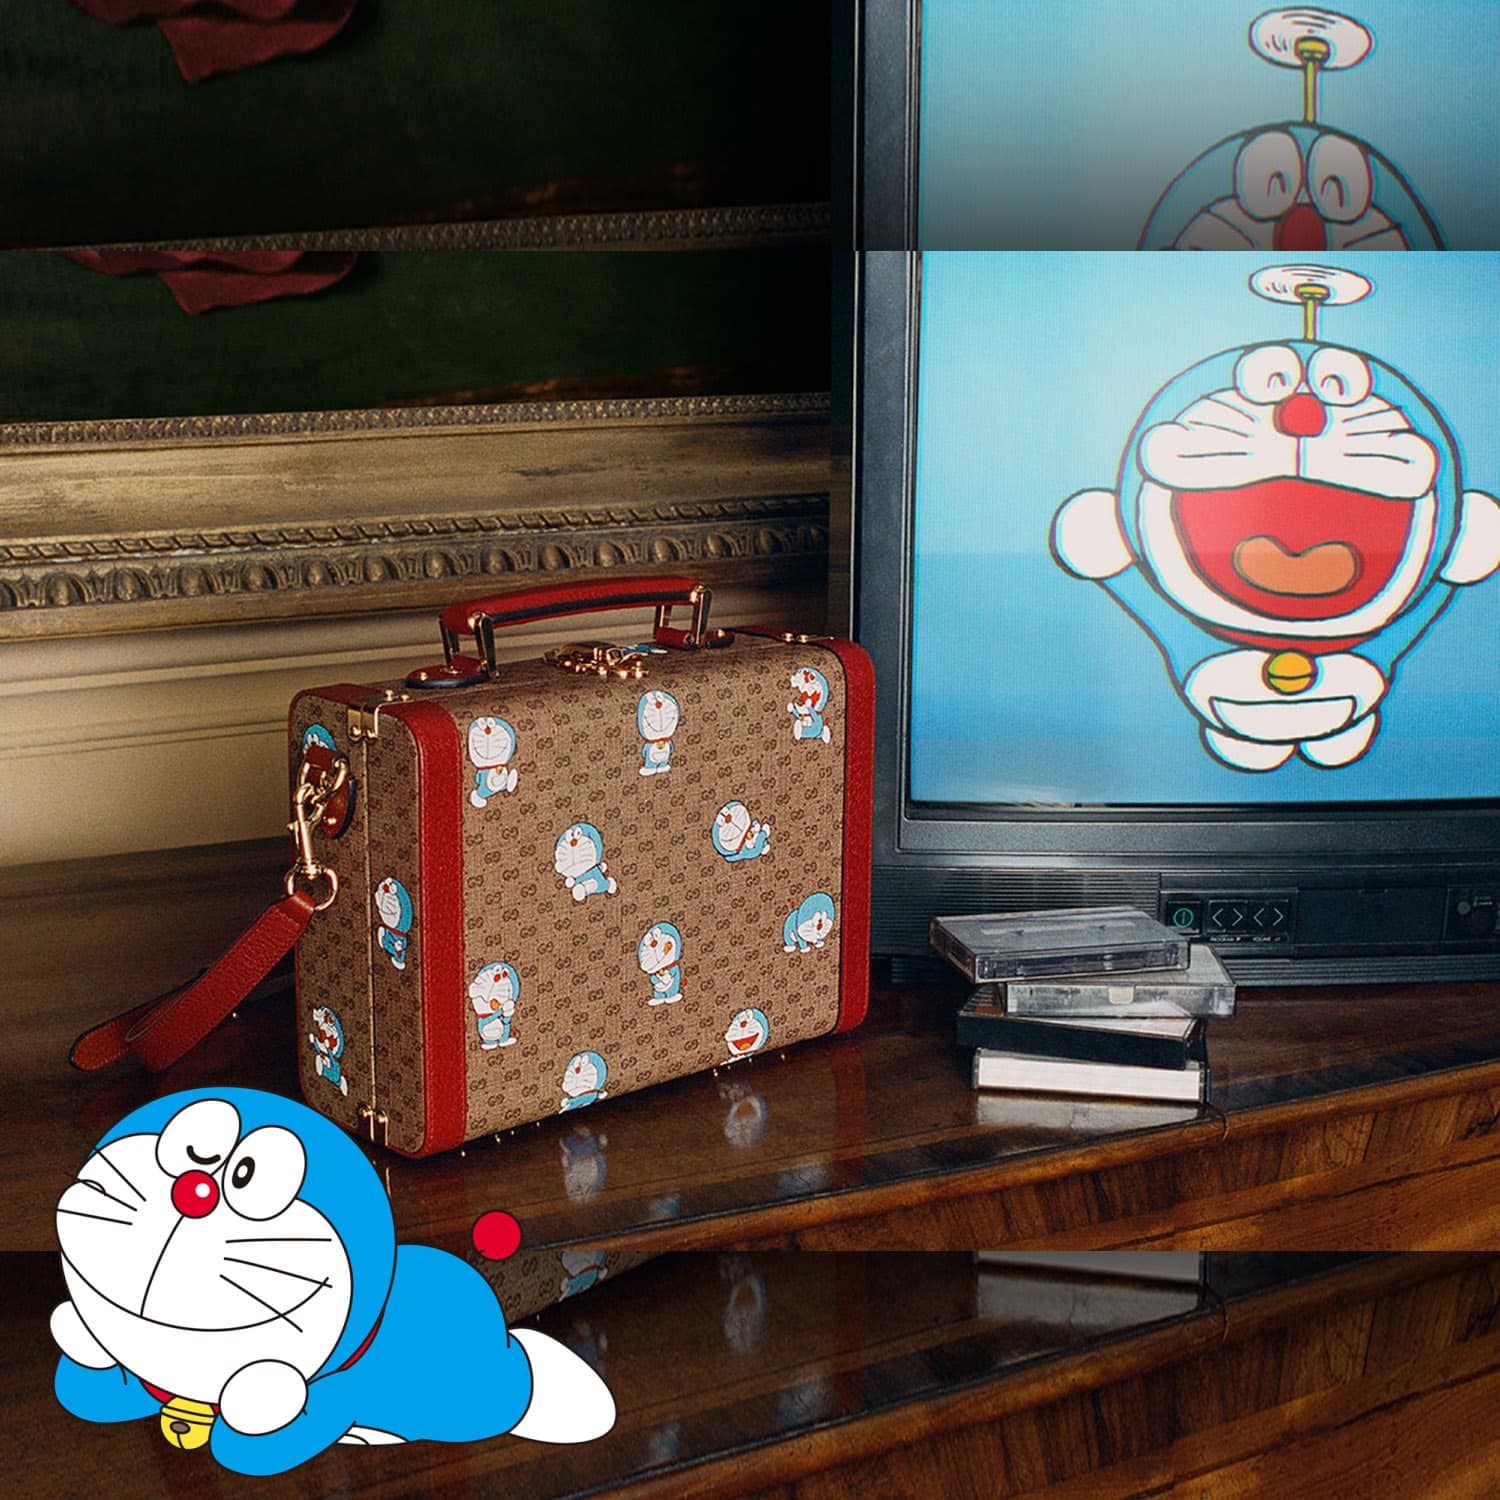 Doraemon x Gucci Chinese New Year 2021 Campaign. RUNWAY MAGAZINE ® Collections. RUNWAY NOW / RUNWAY NEW